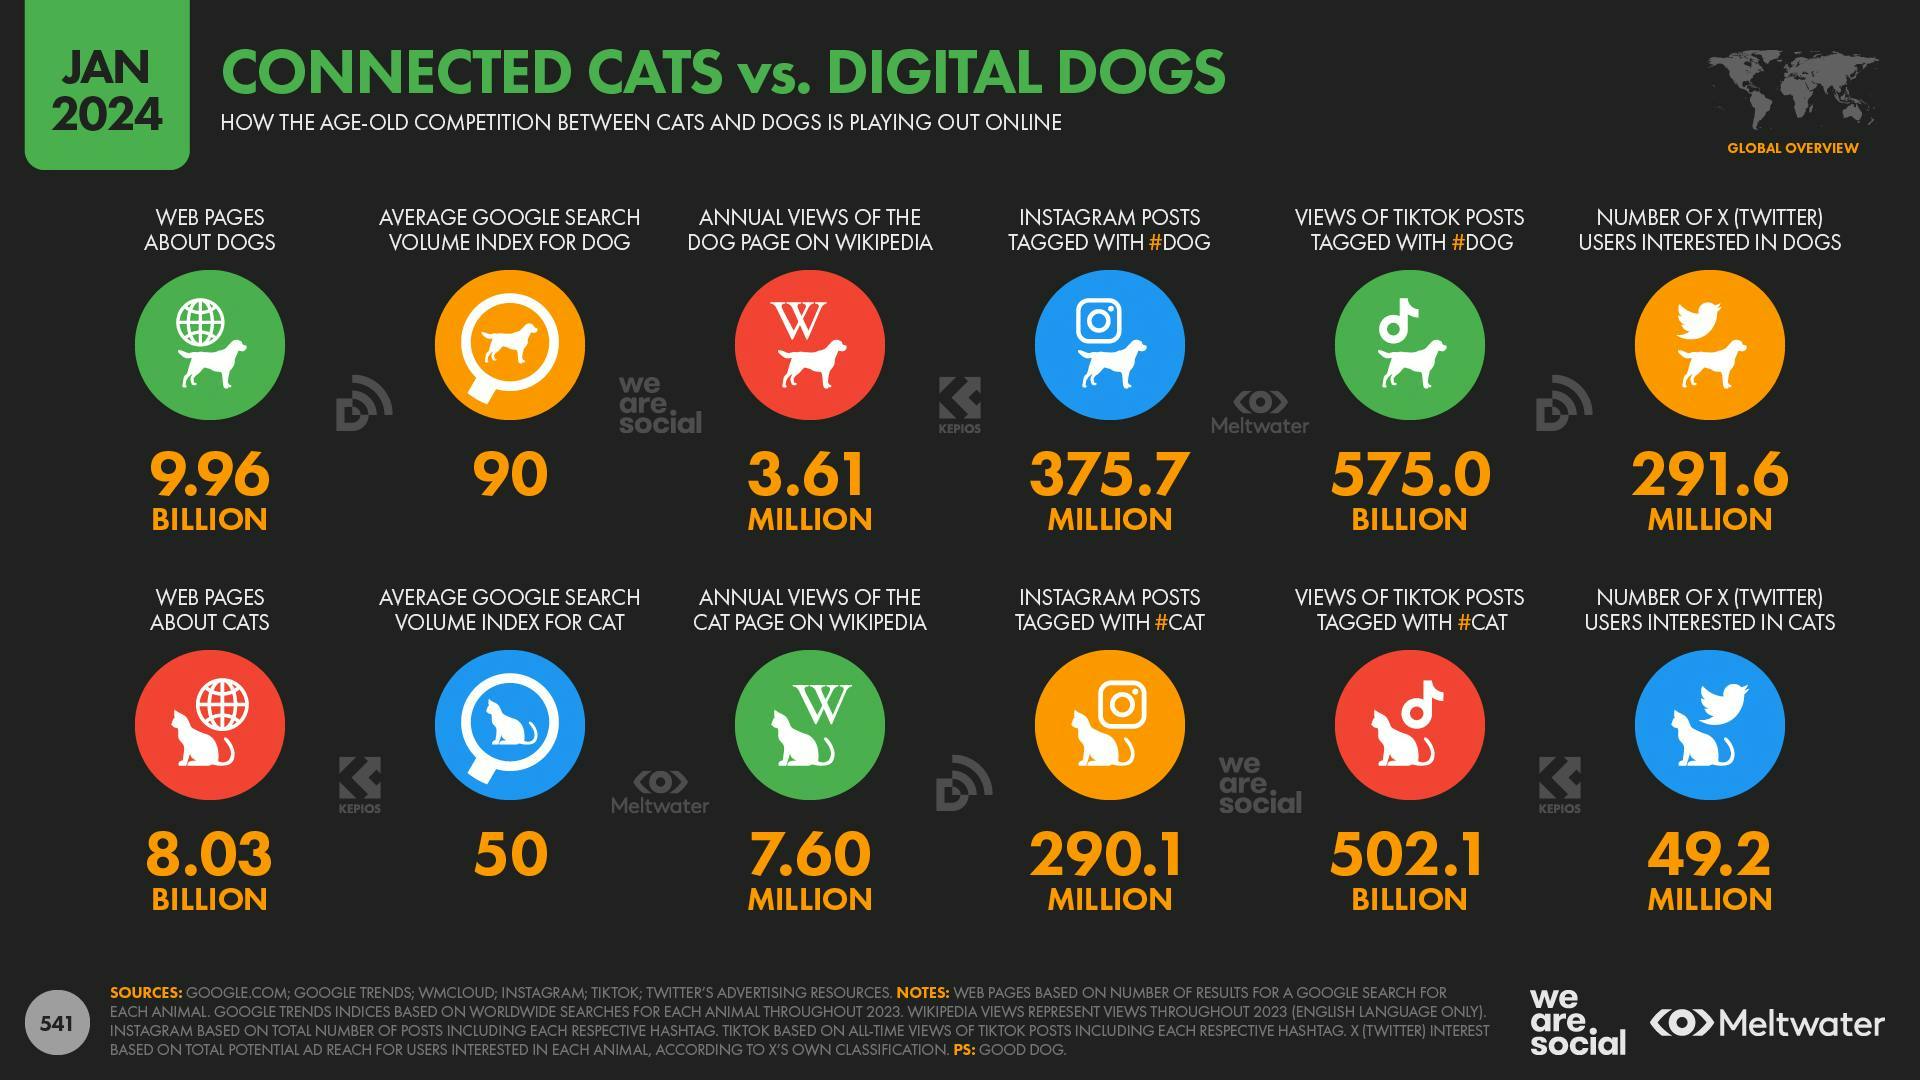 Connected cats vs. digital dogs